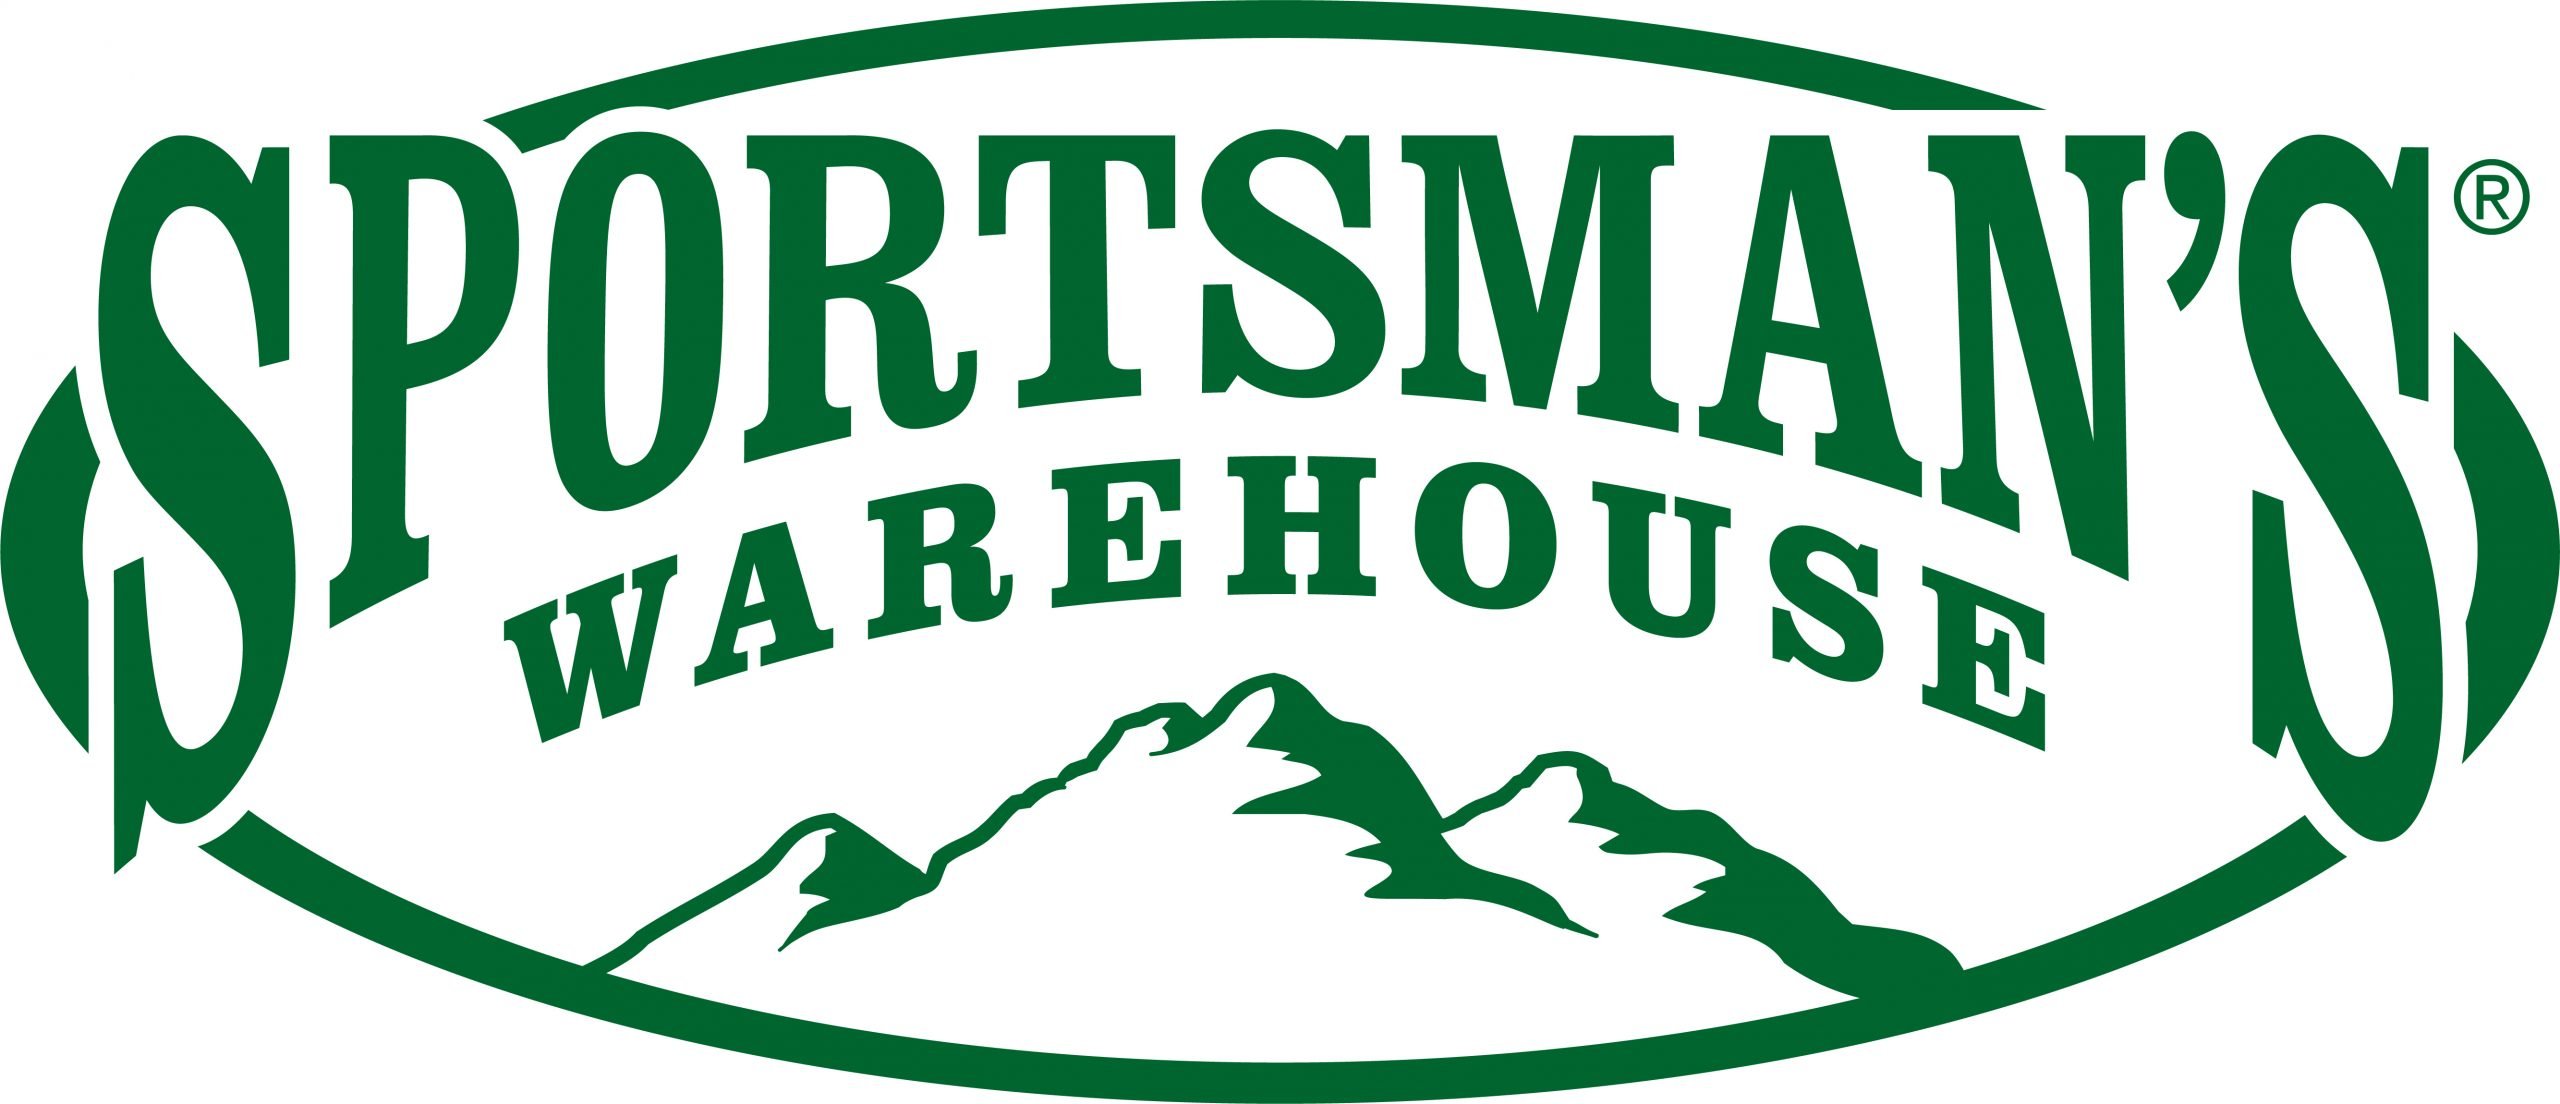 SPORTSMAN’S WAREHOUSE ANNOUNCES 3 NEW STORE LOCATIONS Anglers Channel